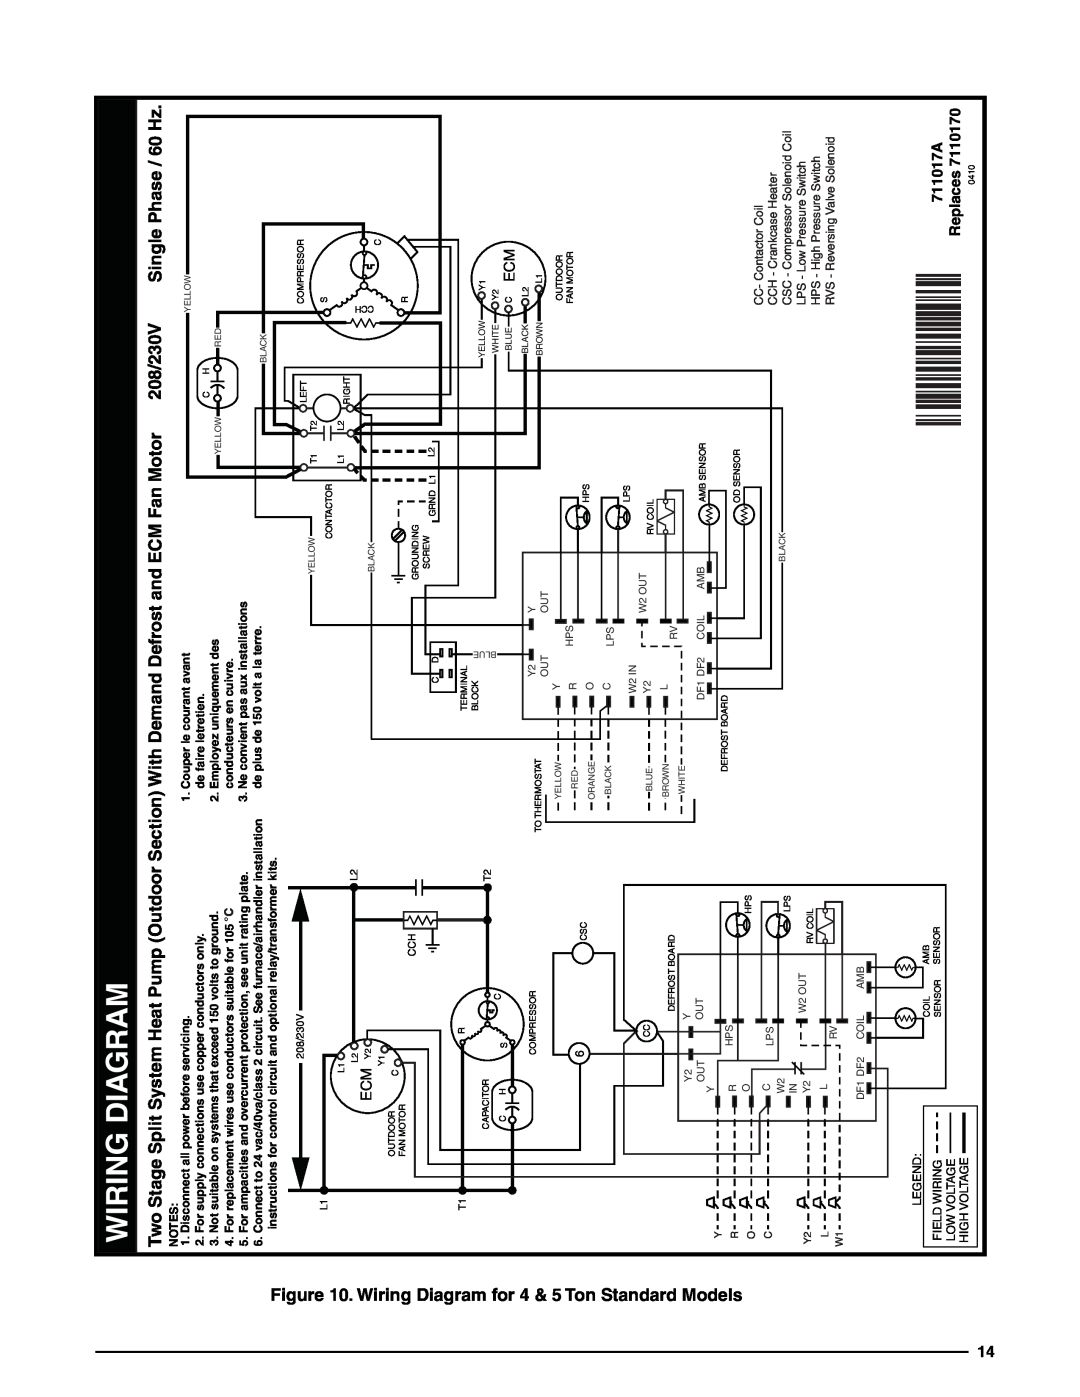 Heat Controller R-410A ¢711017w¤ 711017A, Wiring Diagram, 208/230V Single Phase / 60 Hz, Replaces, CC- Contactor Coil 